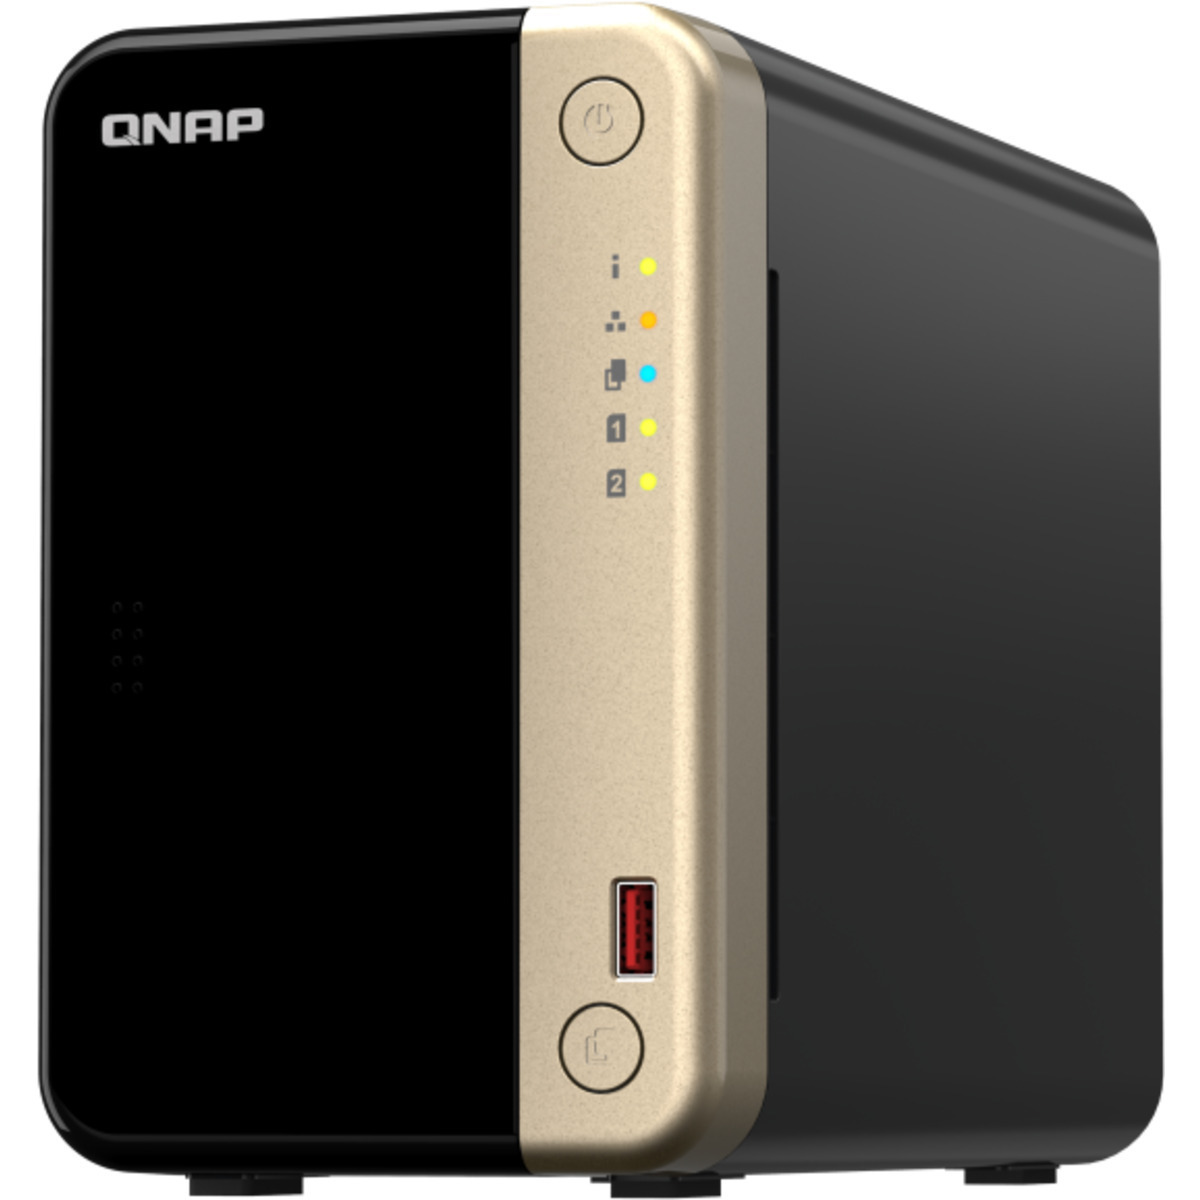 QNAP TS-264 32tb 2-Bay Desktop Multimedia / Power User / Business NAS - Network Attached Storage Device 2x16tb Seagate IronWolf Pro ST16000NT001 3.5 7200rpm SATA 6Gb/s HDD NAS Class Drives Installed - Burn-In Tested - ON SALE TS-264